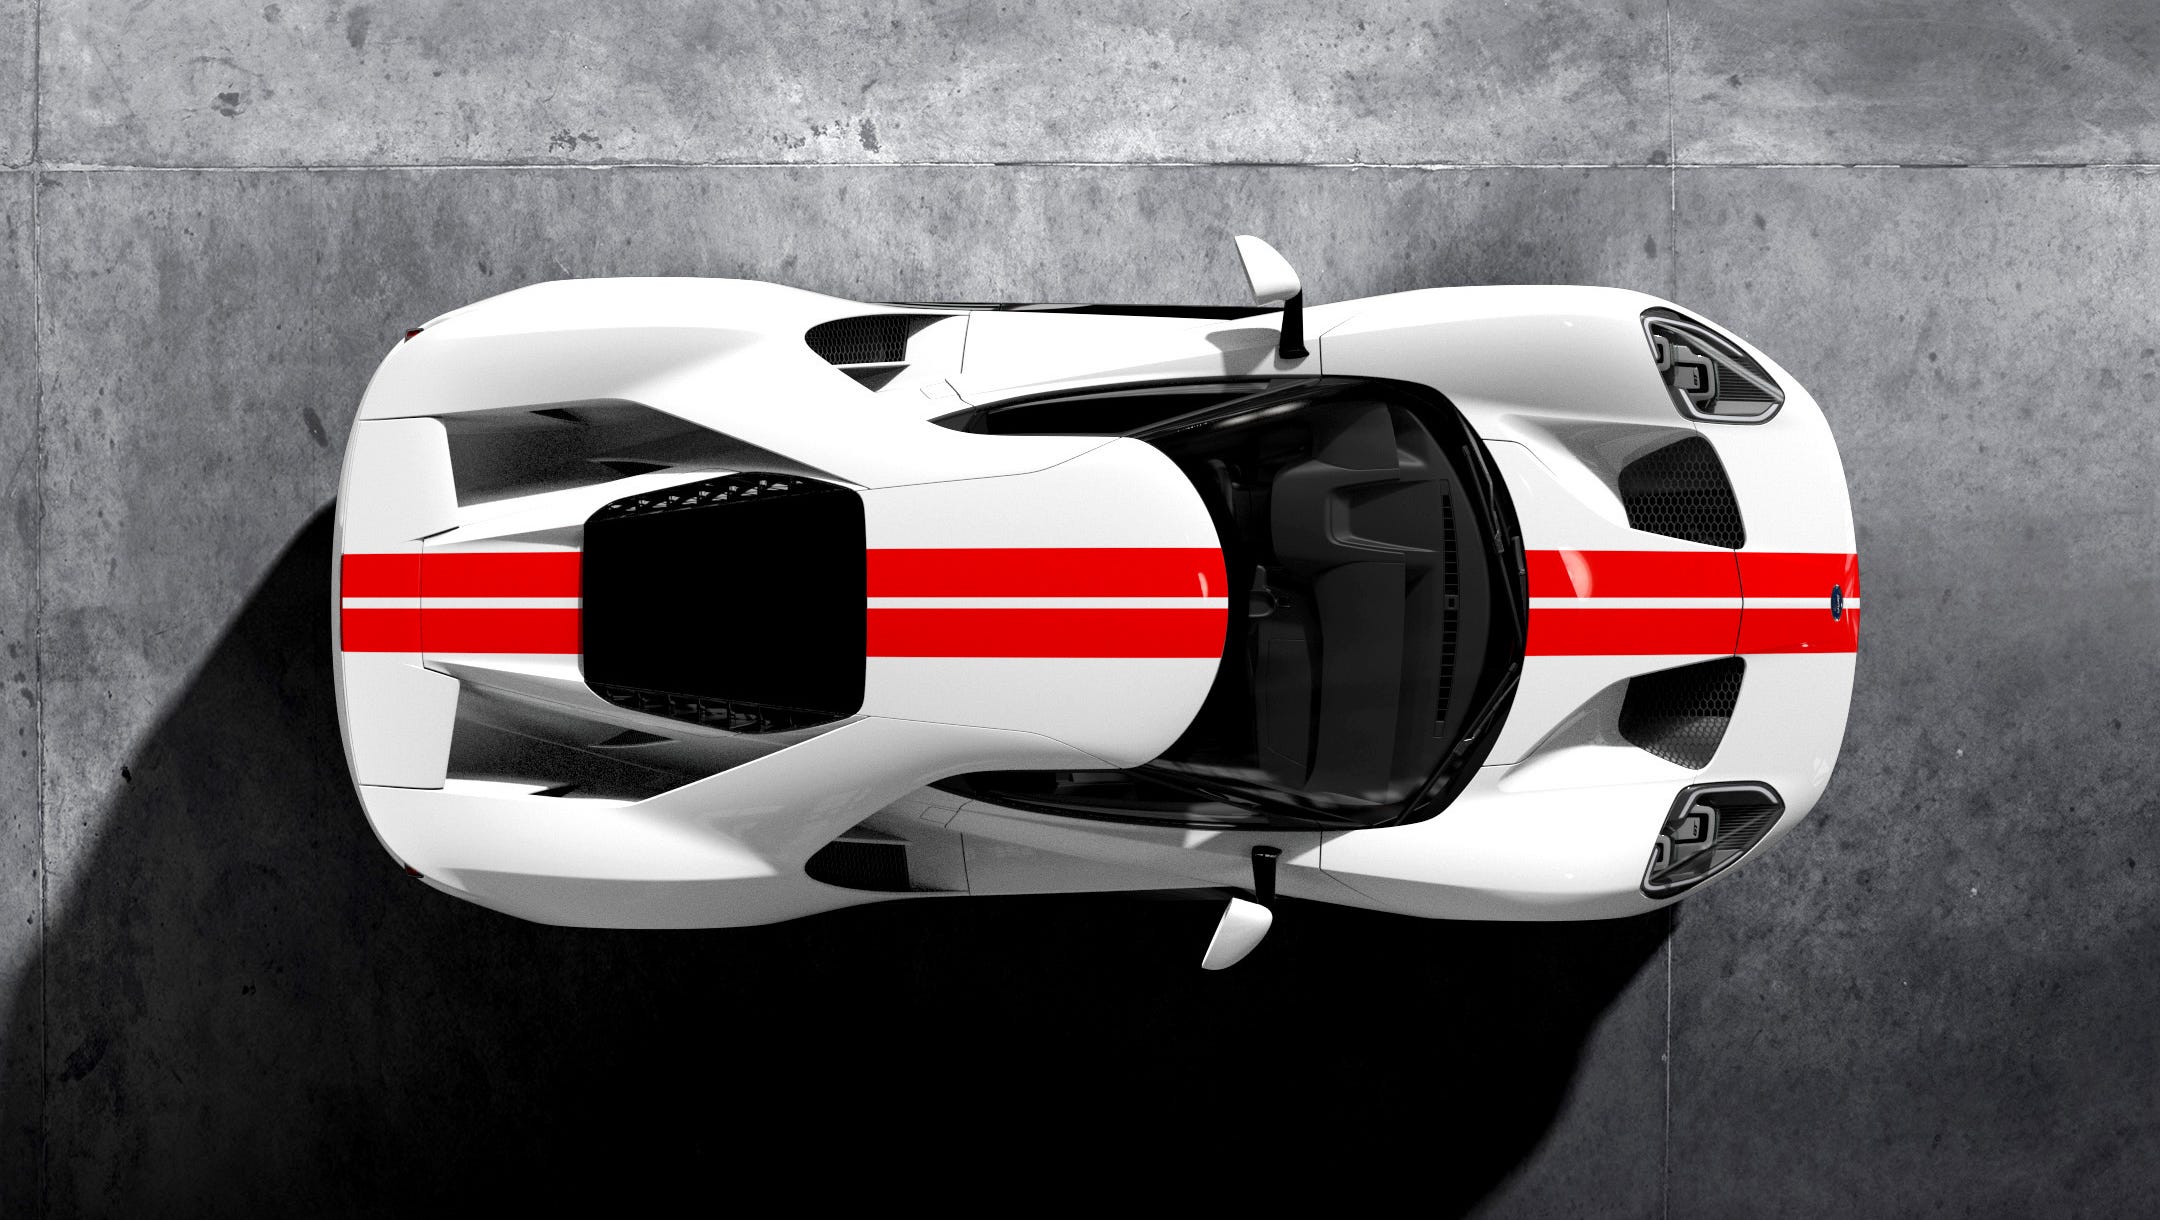 The car will be powered by a 3.5-liter V-6 EcoBoost engine that produces more than 600 horseppower. Above: A GT in Frozen White, with a Race Red stripe.